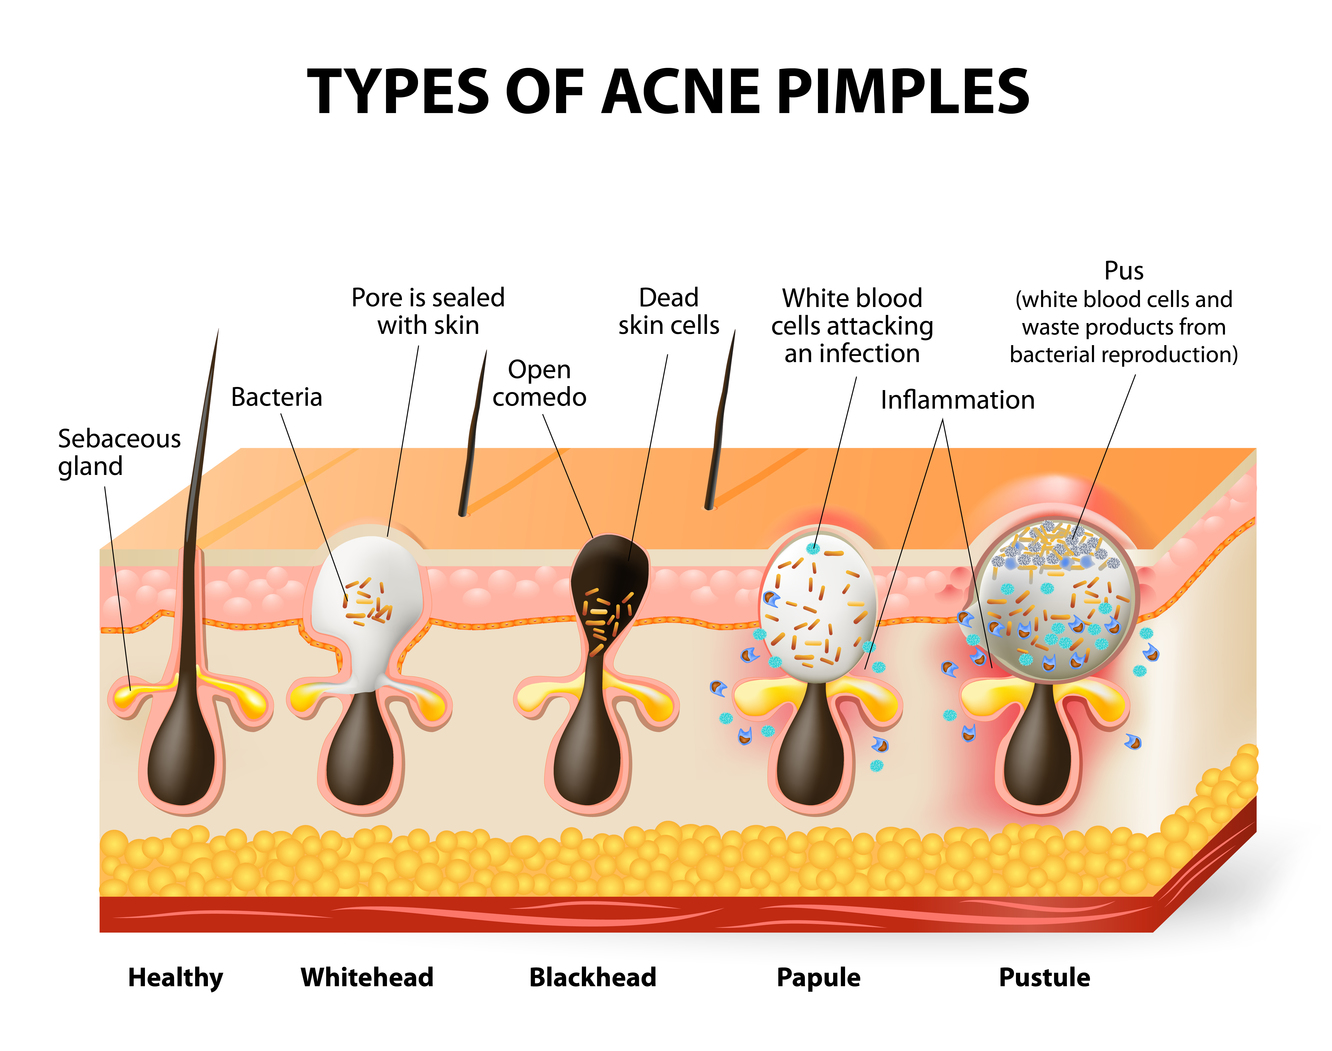 How is acne formed